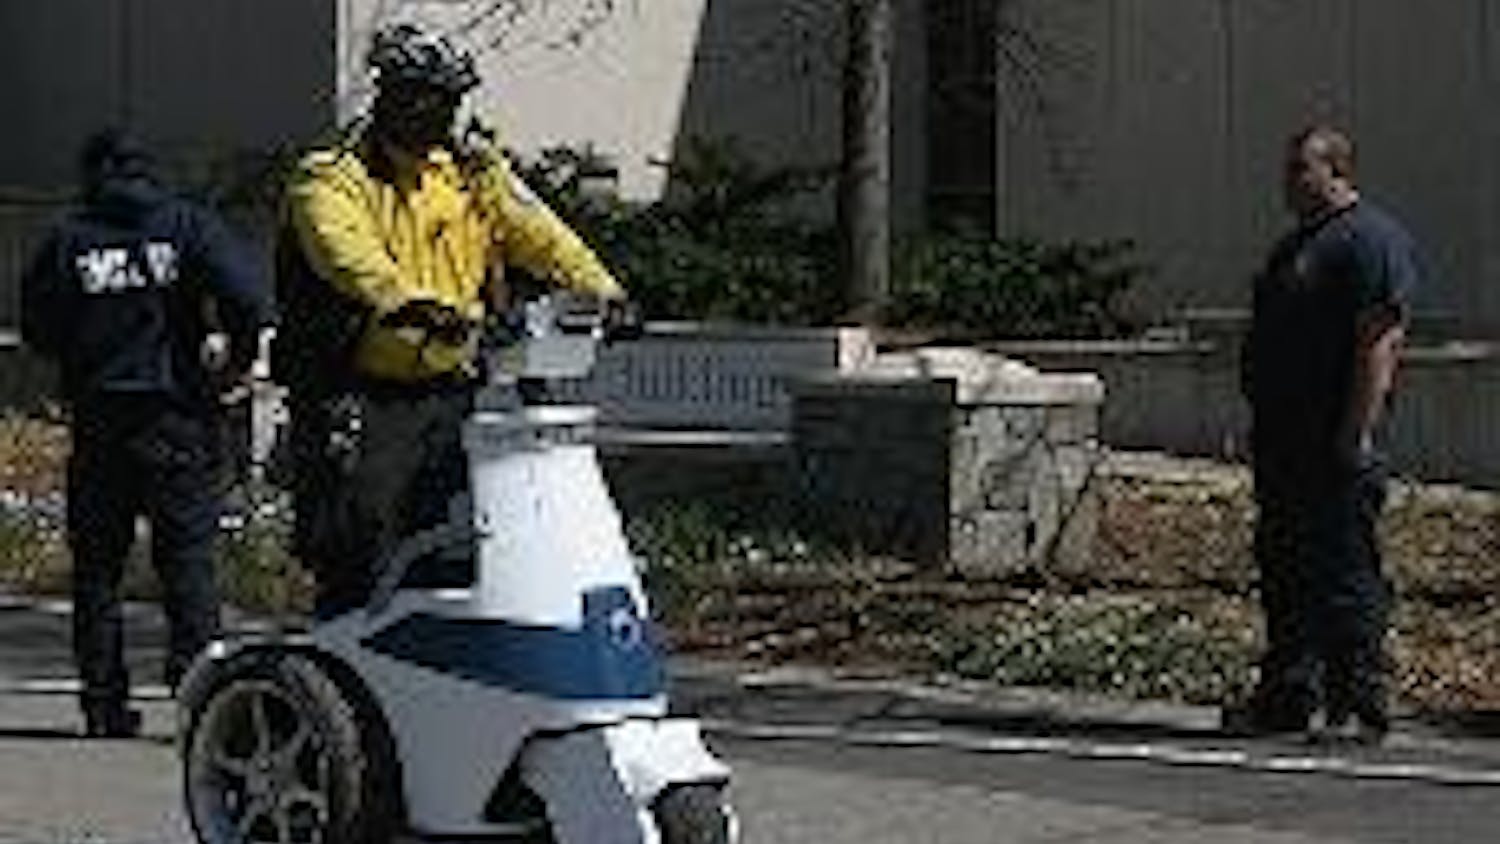 A NEW RIDE - A Public Safety officer rides past the Ward Circle Building on one of the office's new T3 scooters. They purchased three of the scooters and extra batteries for $34,000. The purchase replaced one Public Safety patrol car, according to Chief M